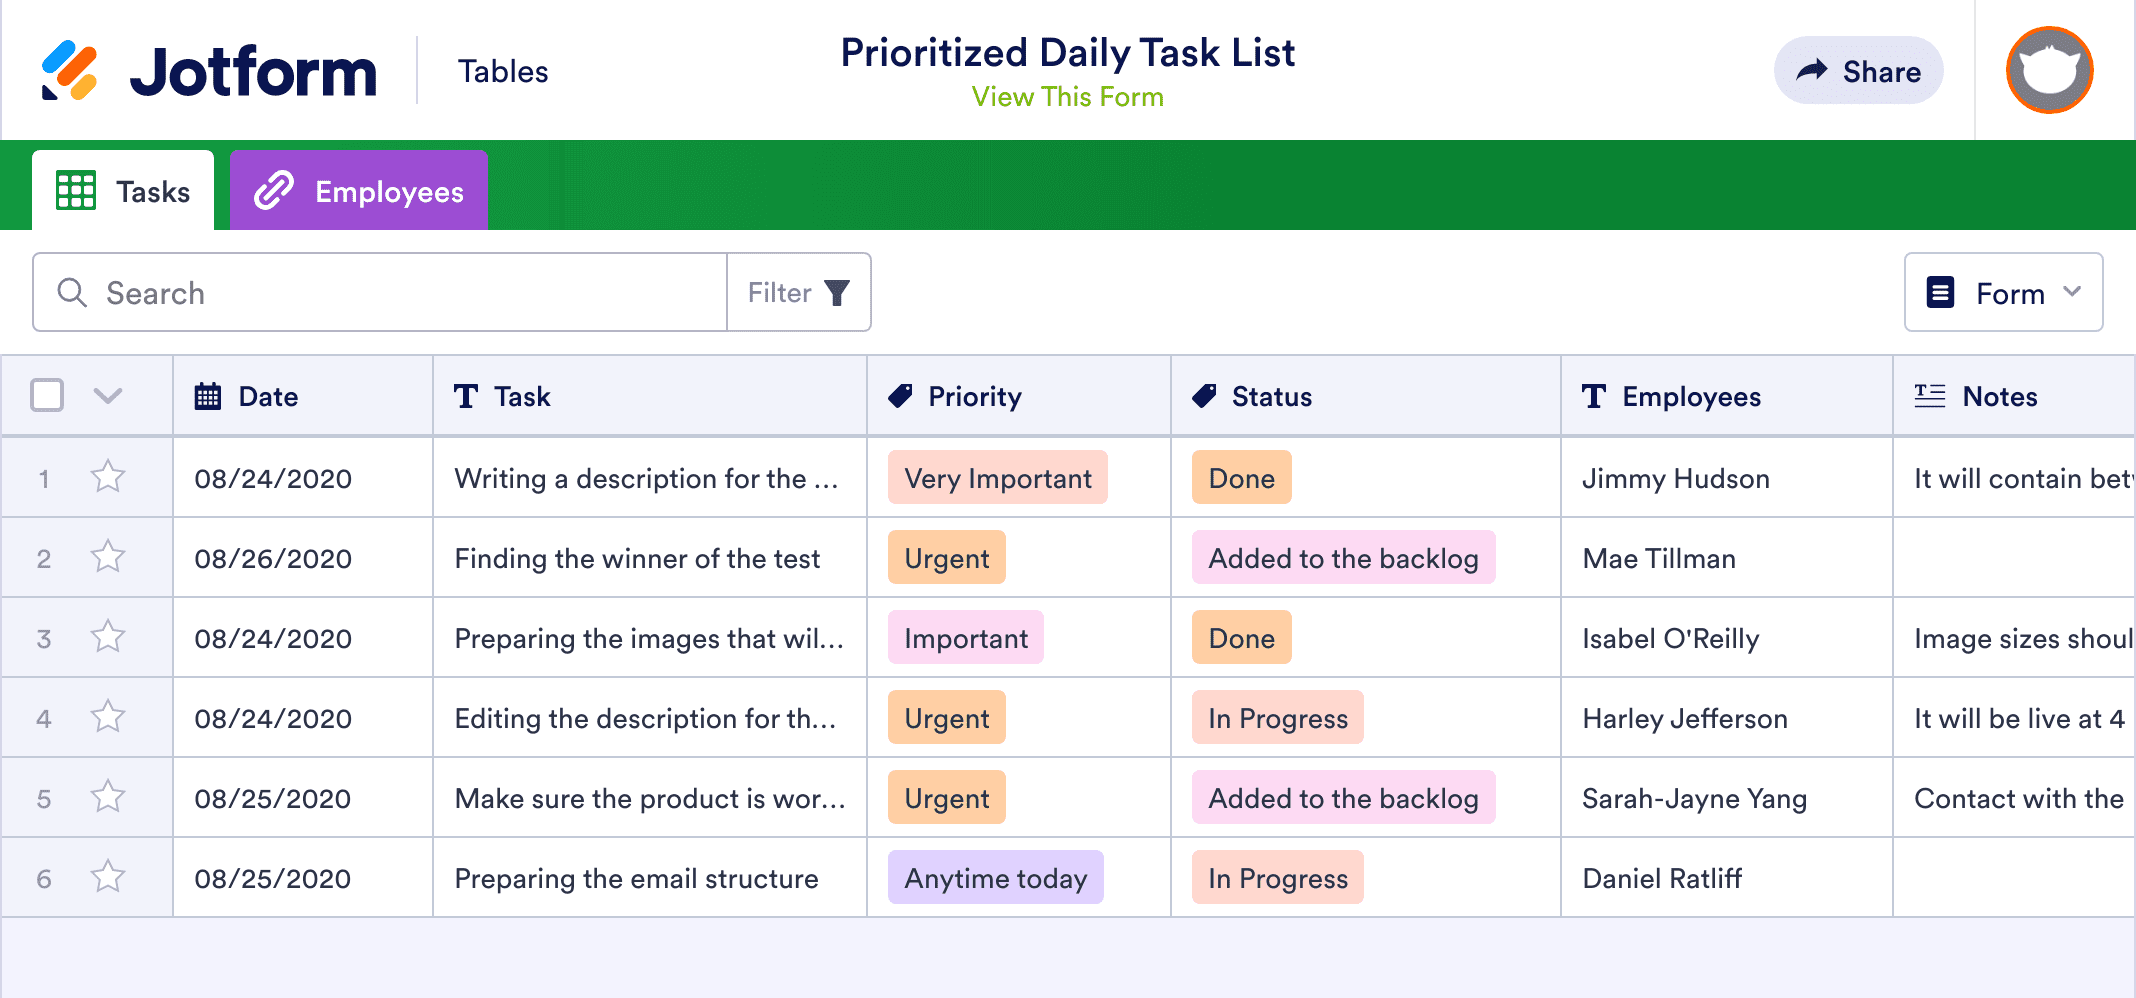 Prioritized Daily Task List Template | Jotform Tables